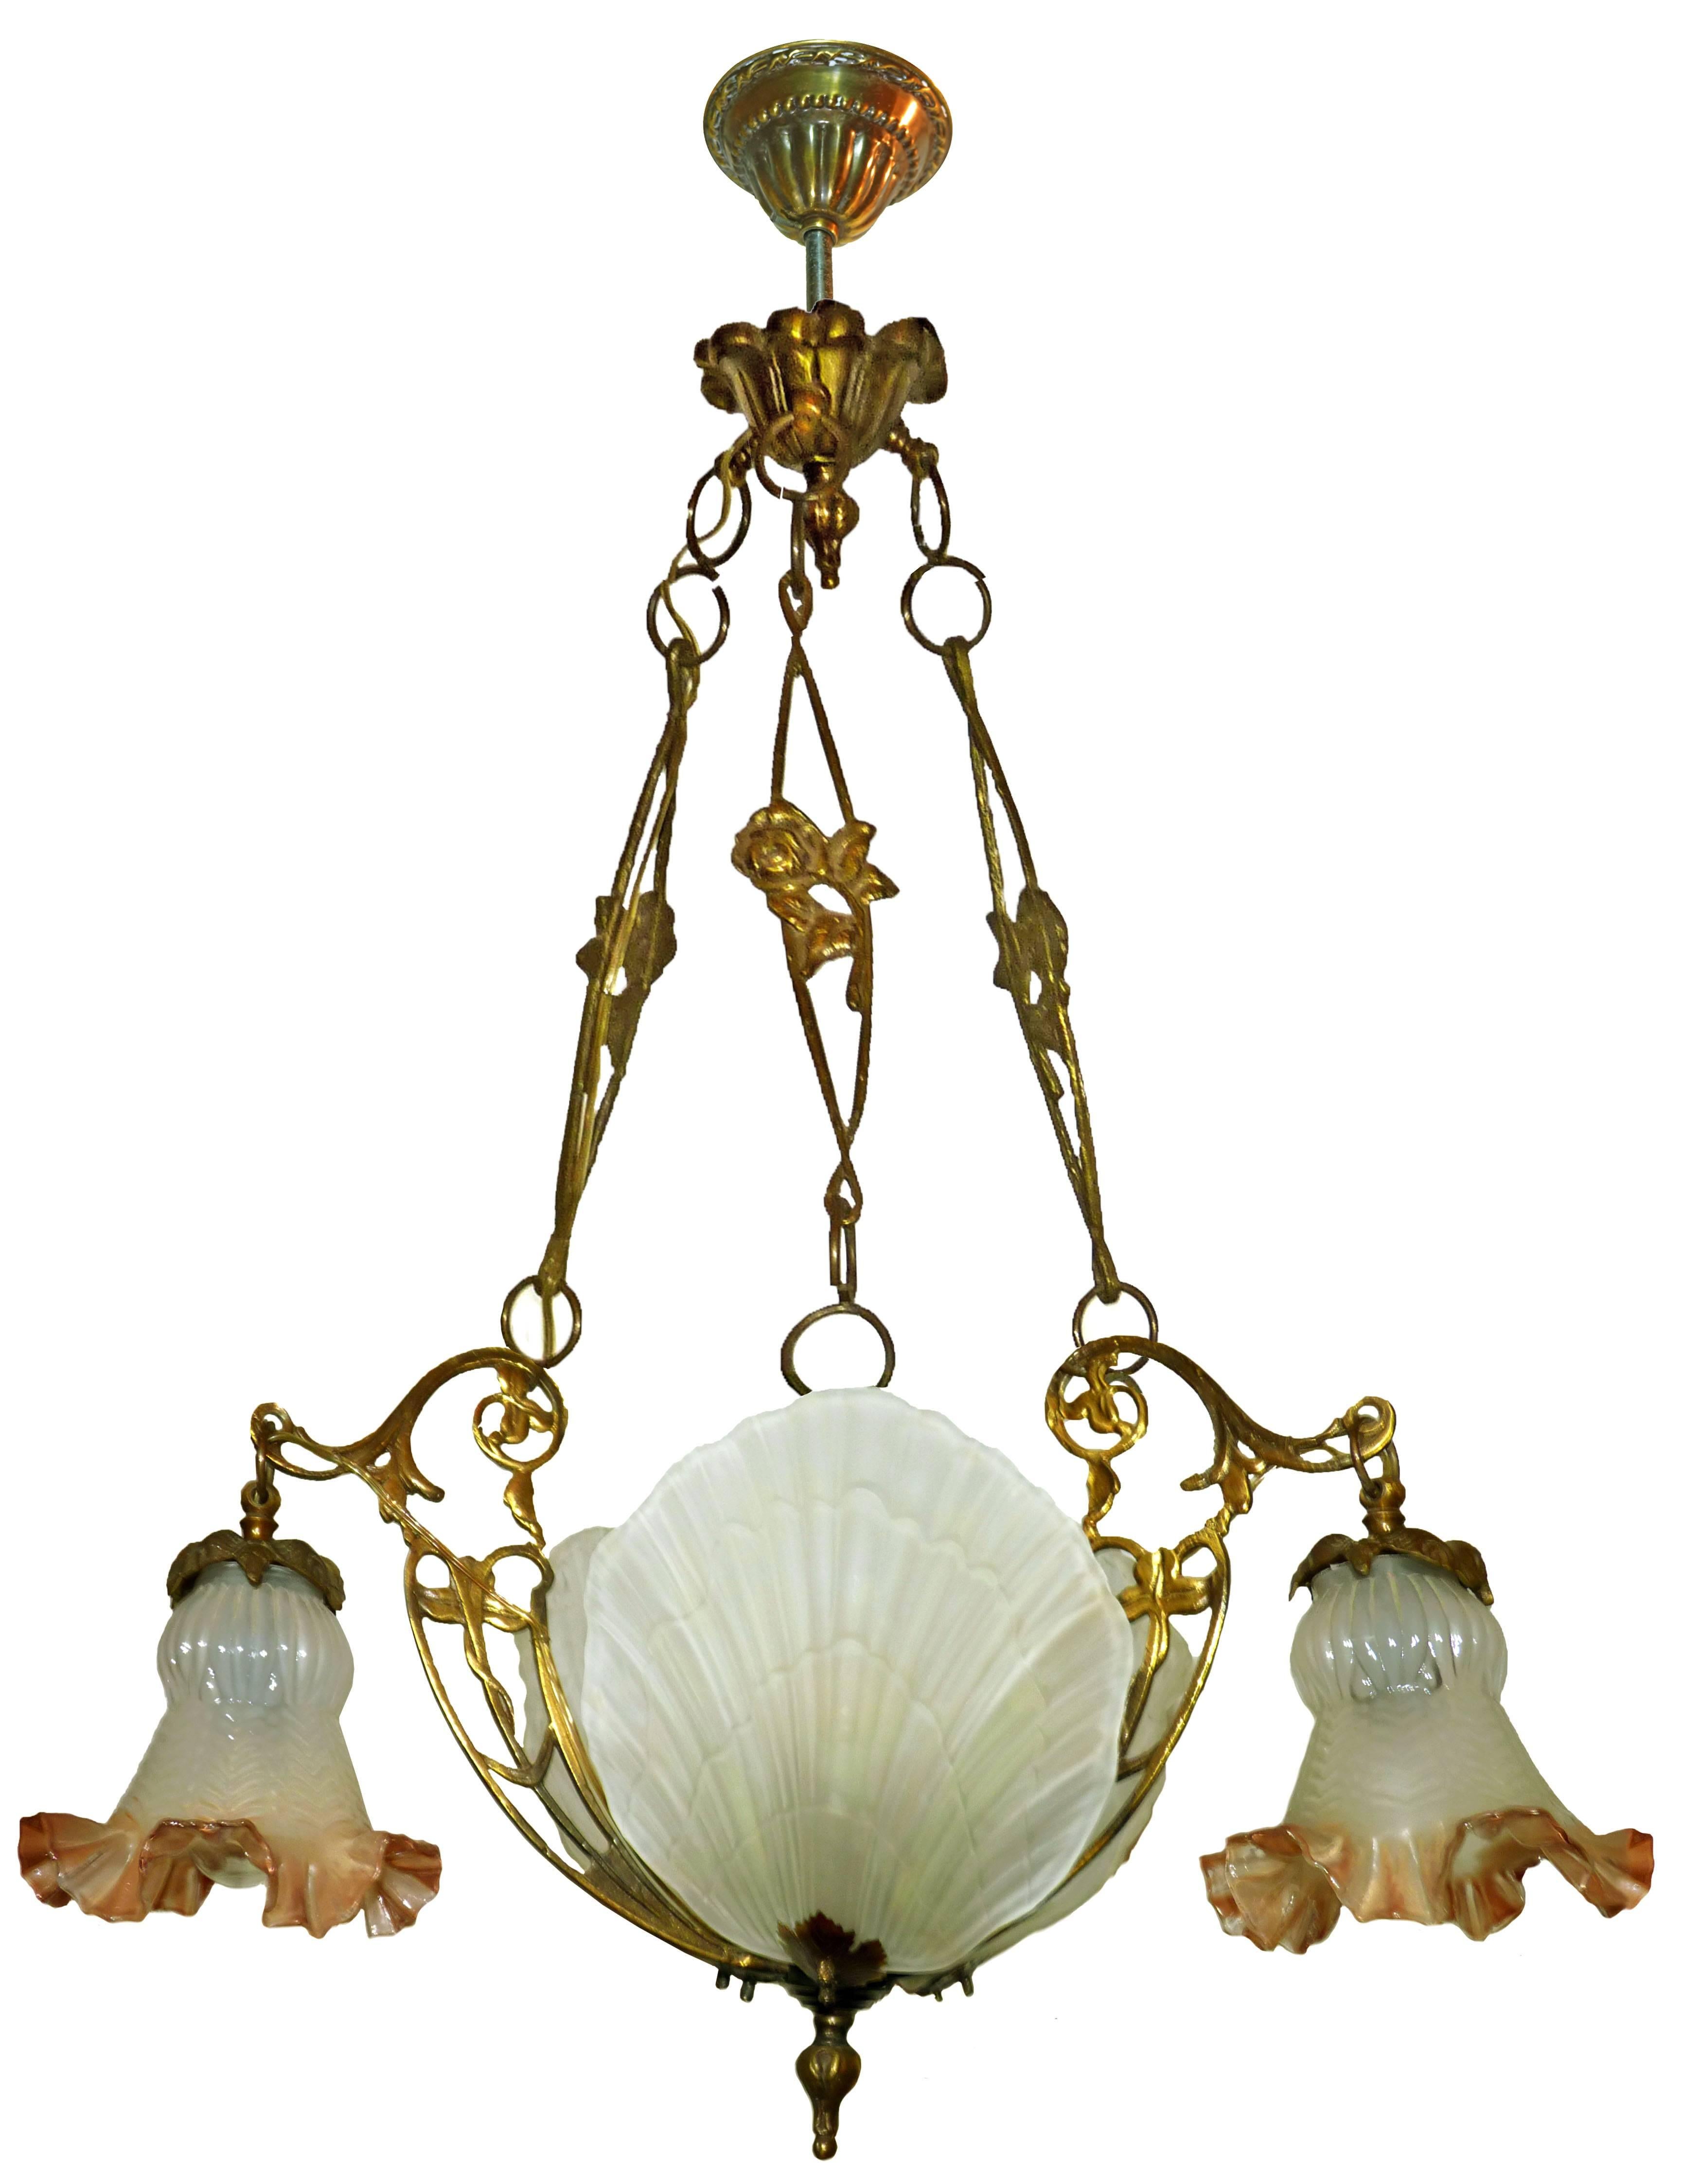 French Art Nouveau /Art Deco chandelier in bronze and frosted glass shades.
Measures: 
Diameter 24 in/ 60 cm
Height 30 in/ 75 cm
Weight 6 Kg / 13 lb
Four-light bulbs (3 / E14 + 1 / E27/ good working condition/European wiring.
Also have